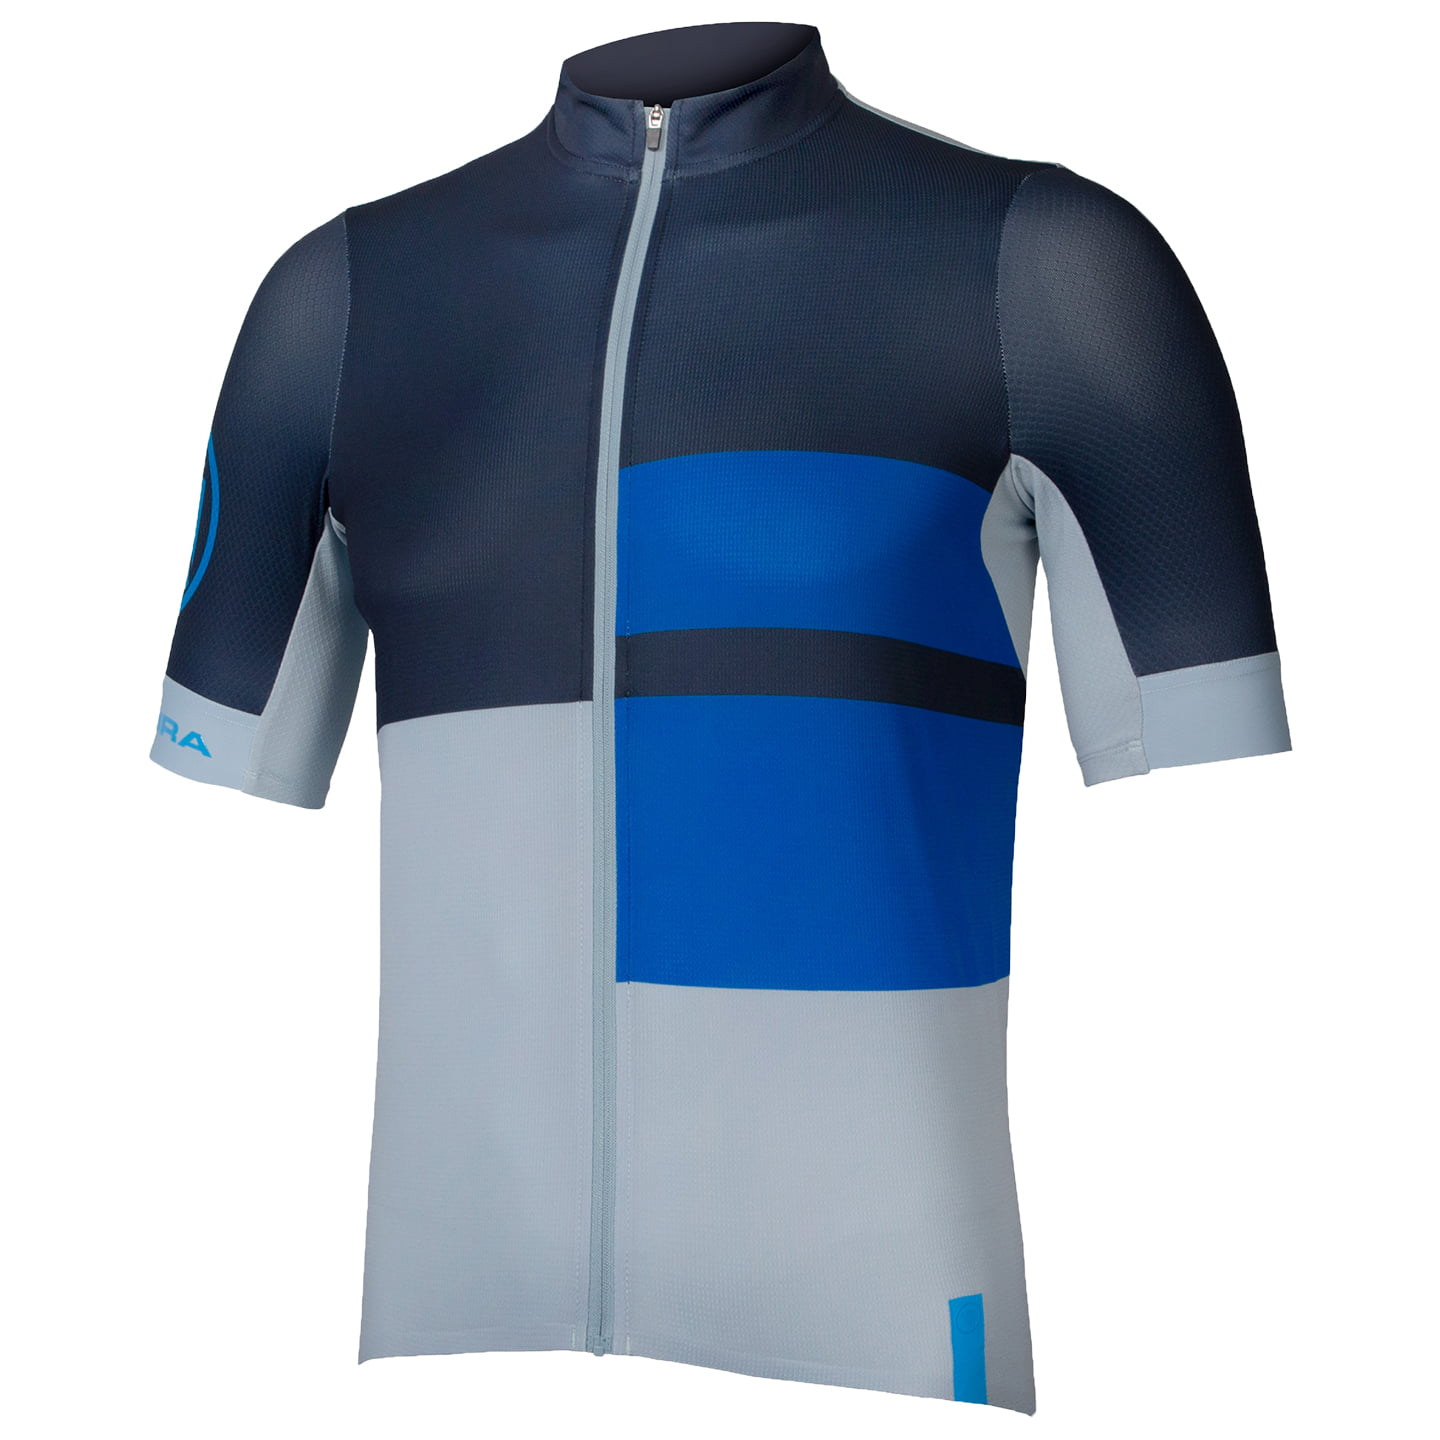 ENDURA FS260 Print Short Sleeve Jersey Short Sleeve Jersey, for men, size 2XL, Cycling jersey, Cycle clothing